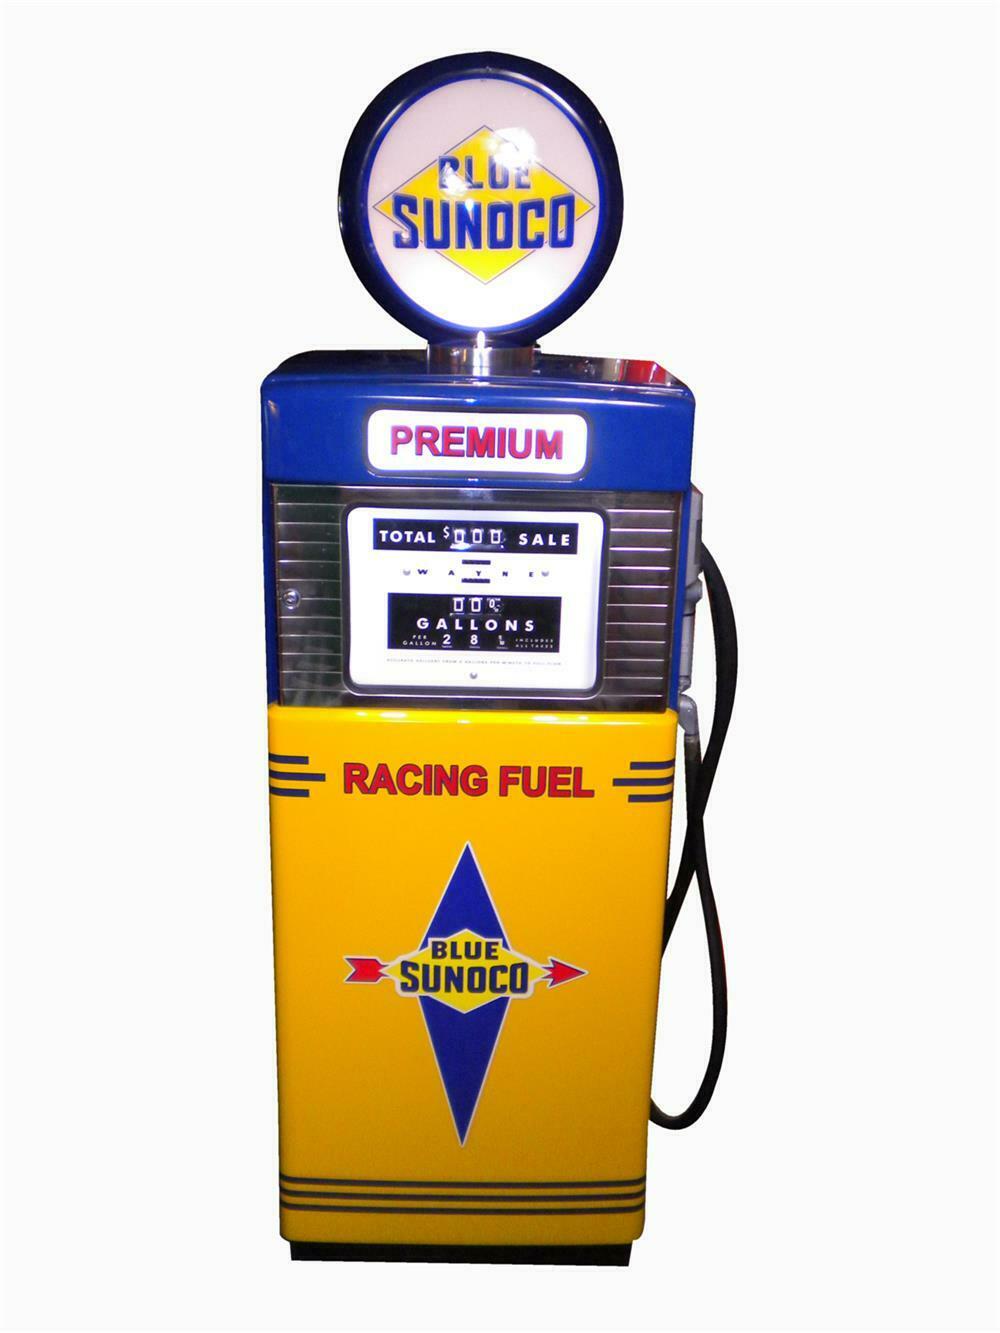 Killer late 1950s-early '60s restored Blue Sunoco Racing Fuel